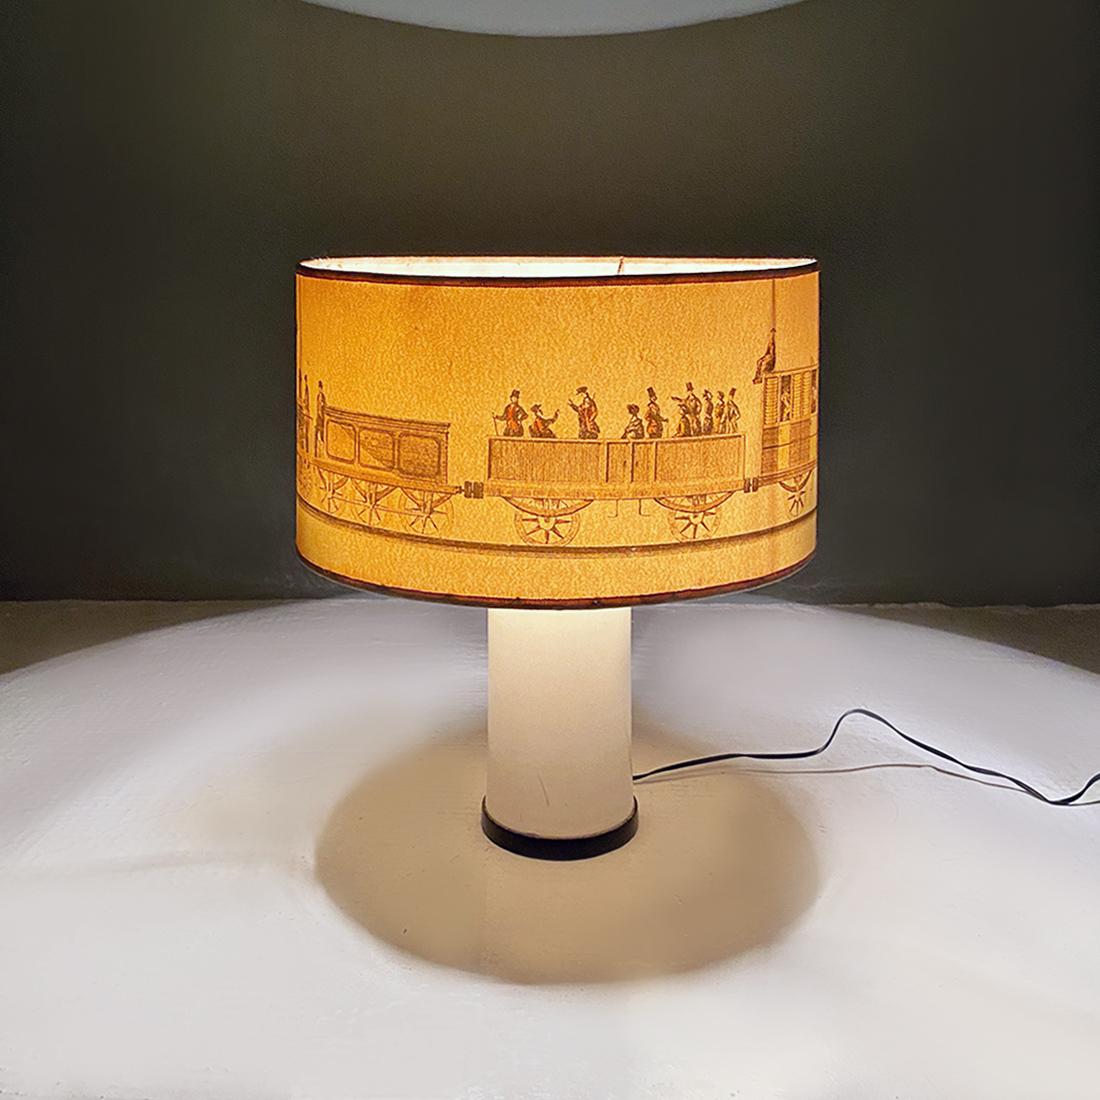 Italian modern white metal and parchment table lamp, 1970s
Table lamp with white metal base and black gasket at the base, original parchment lampshade with drawings of steam train carriages.
1970 approx.
Vintage conditions, clearly visible burn